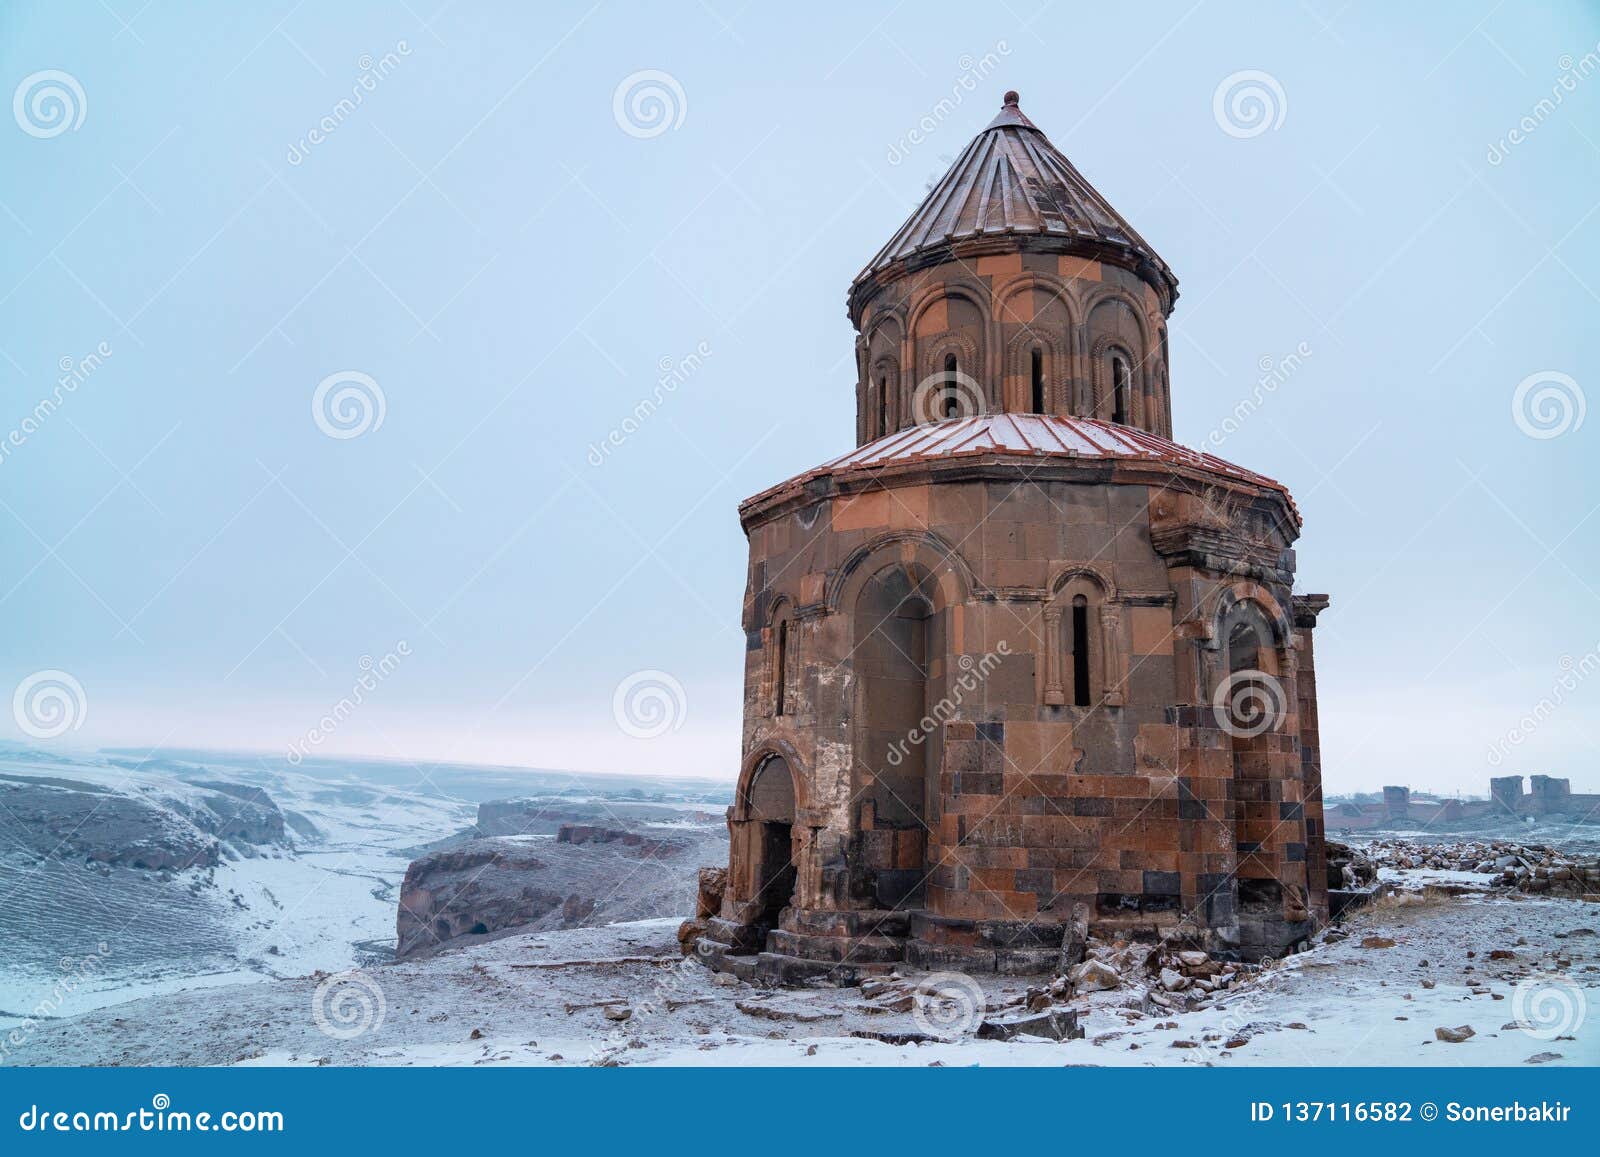 ani ruins, ani is a ruined city-site situated in the turkish province of kars